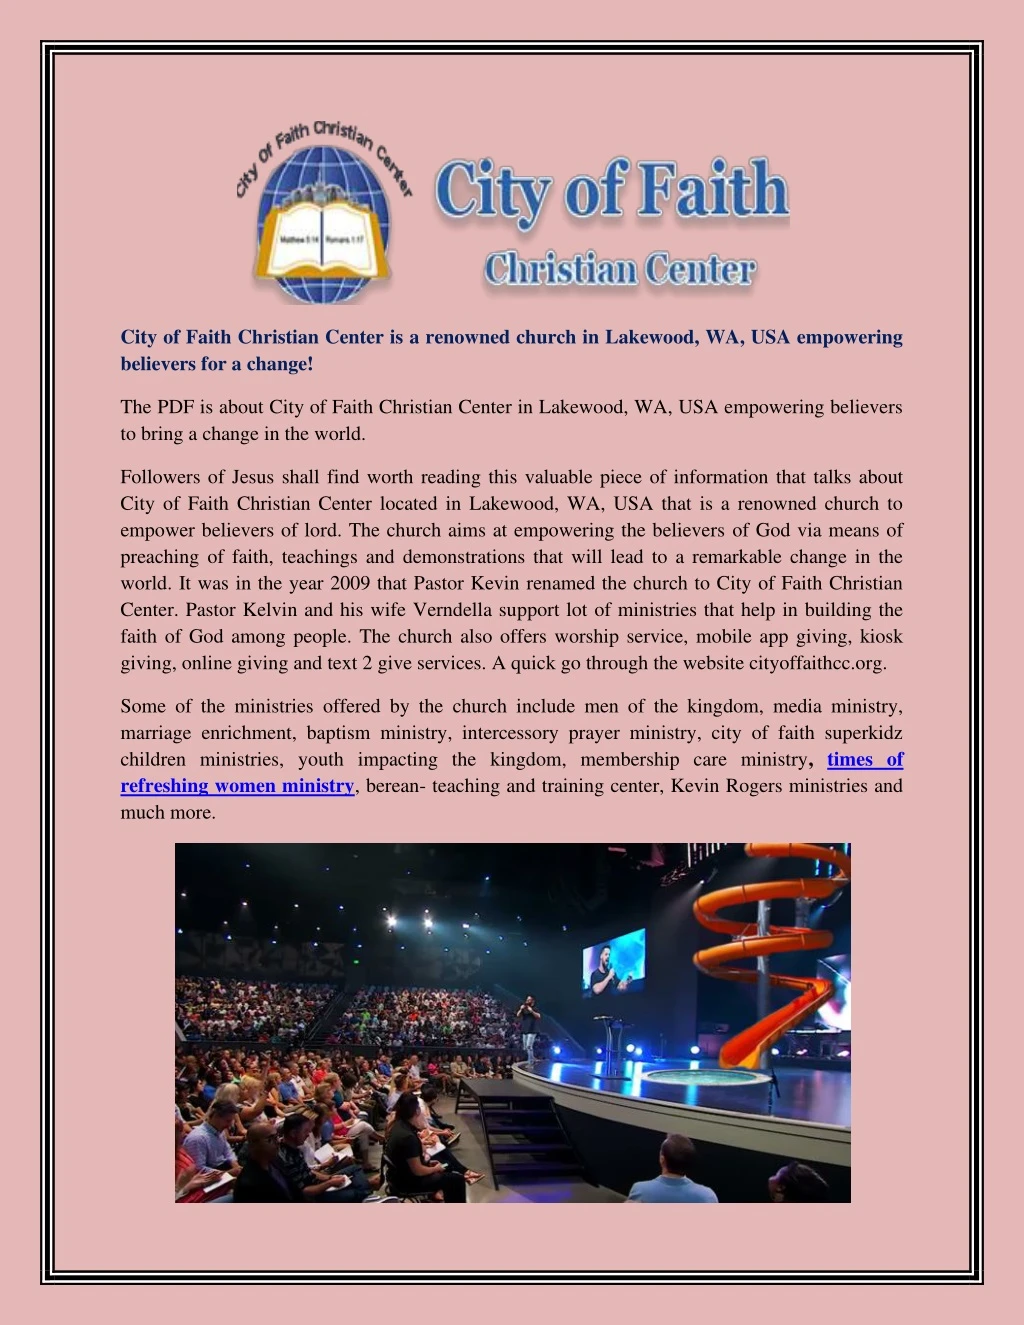 city of faith christian center is a renowned